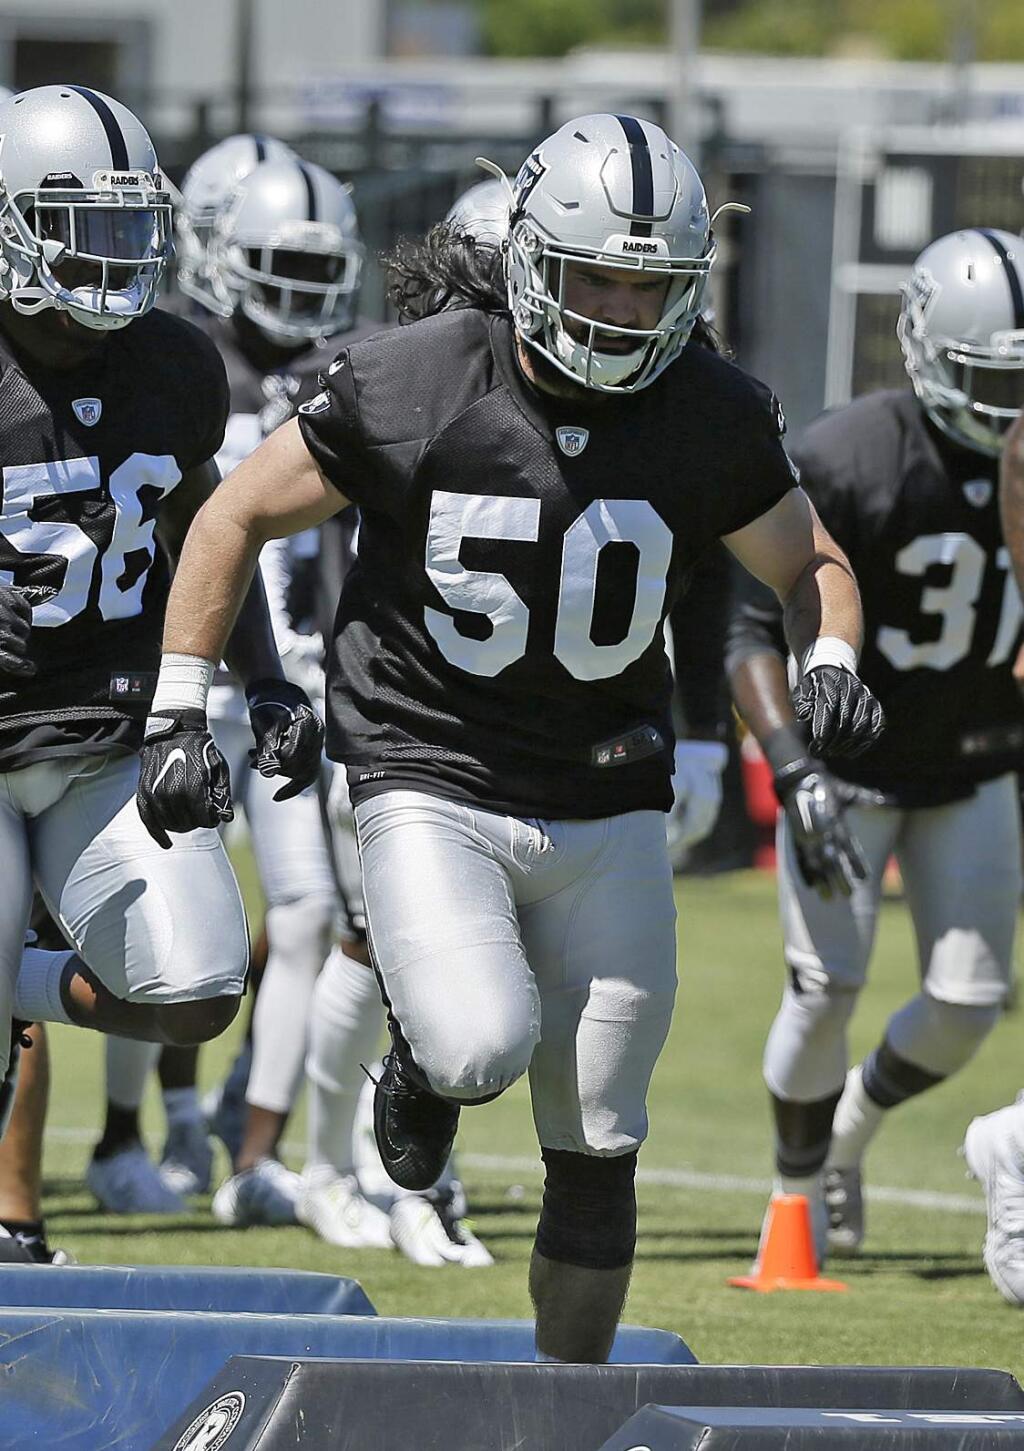 In this July 29, 2016, file photo, Oakland Raiders linebacker Ben Heeney (50) runs through obstacles during practice at the team's training camp in Napa. (AP Photo/Eric Risberg, File)